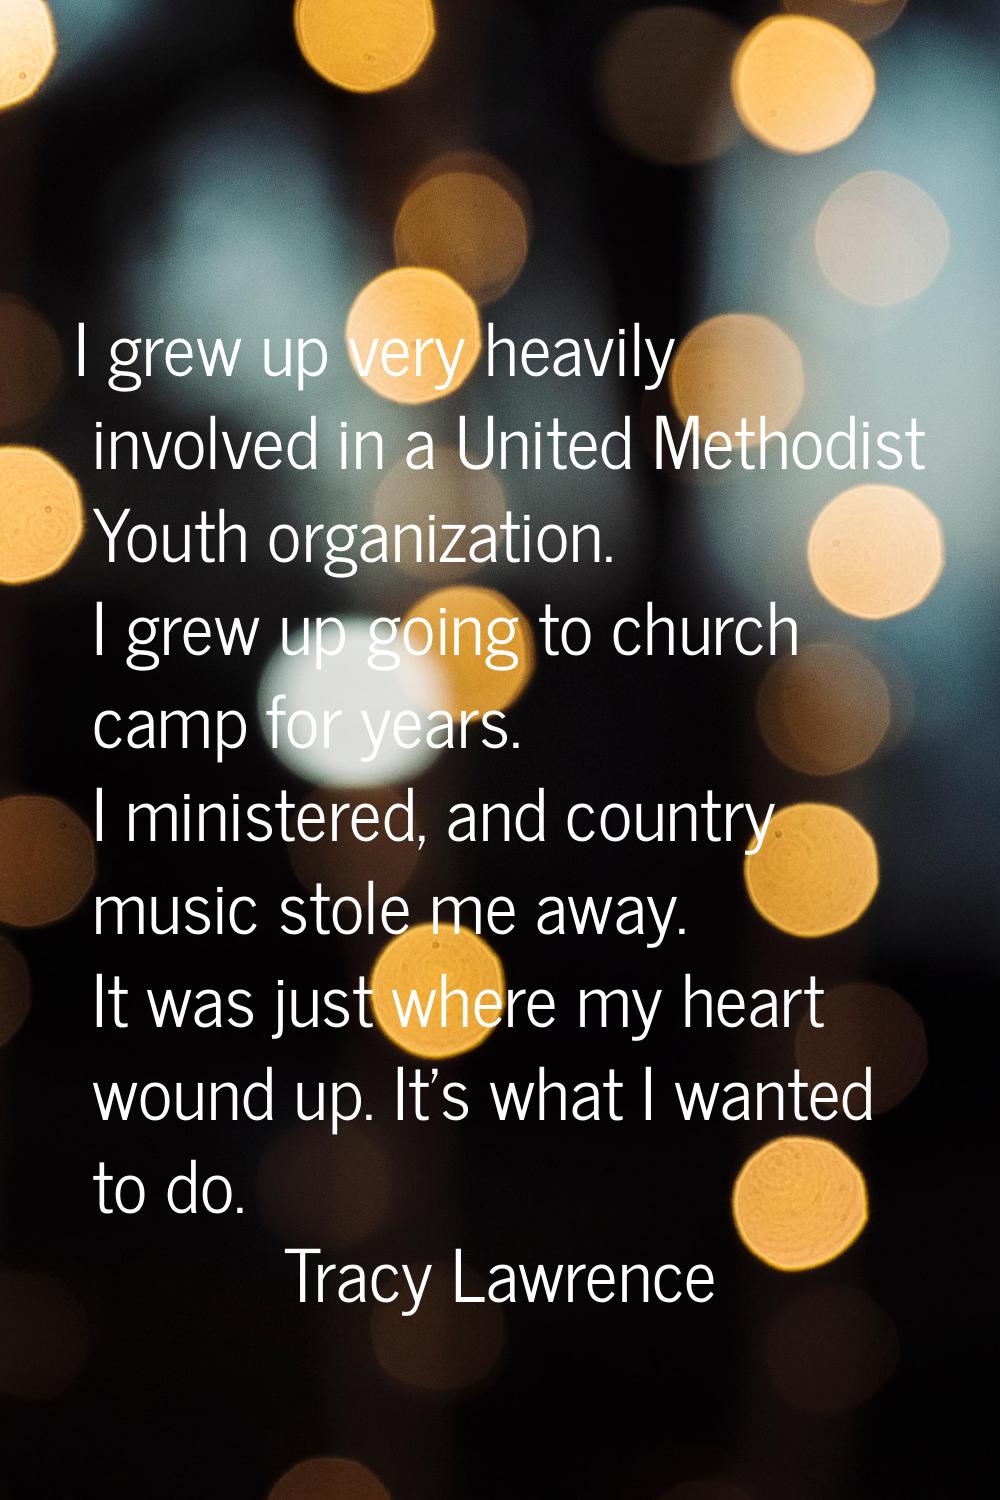 I grew up very heavily involved in a United Methodist Youth organization. I grew up going to church